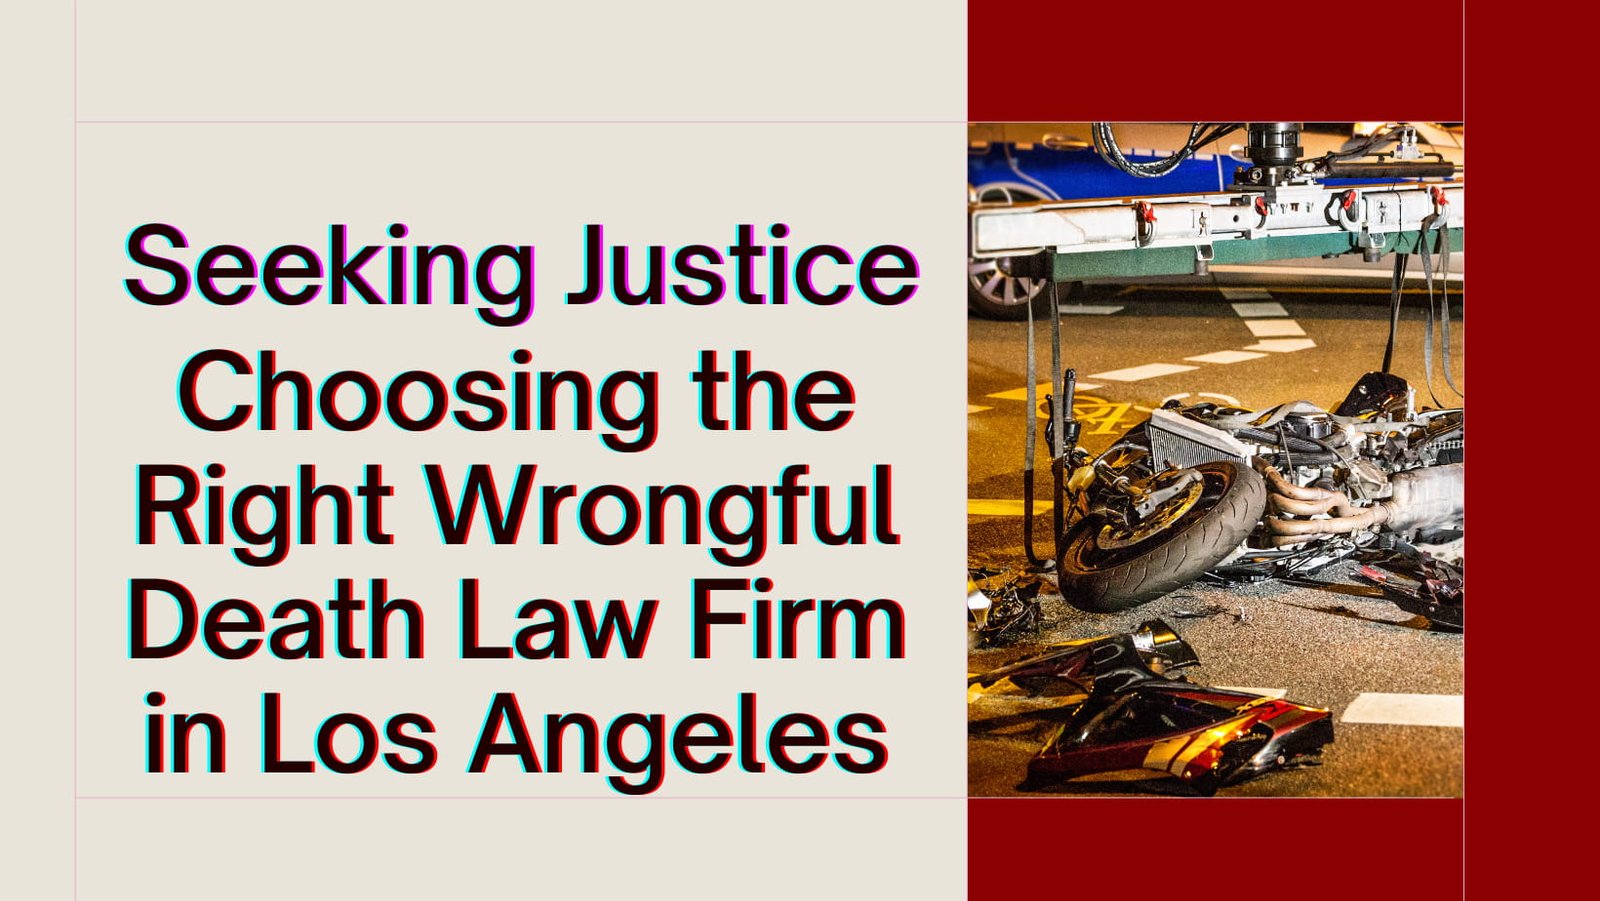 wrongful death law firm in los angeles